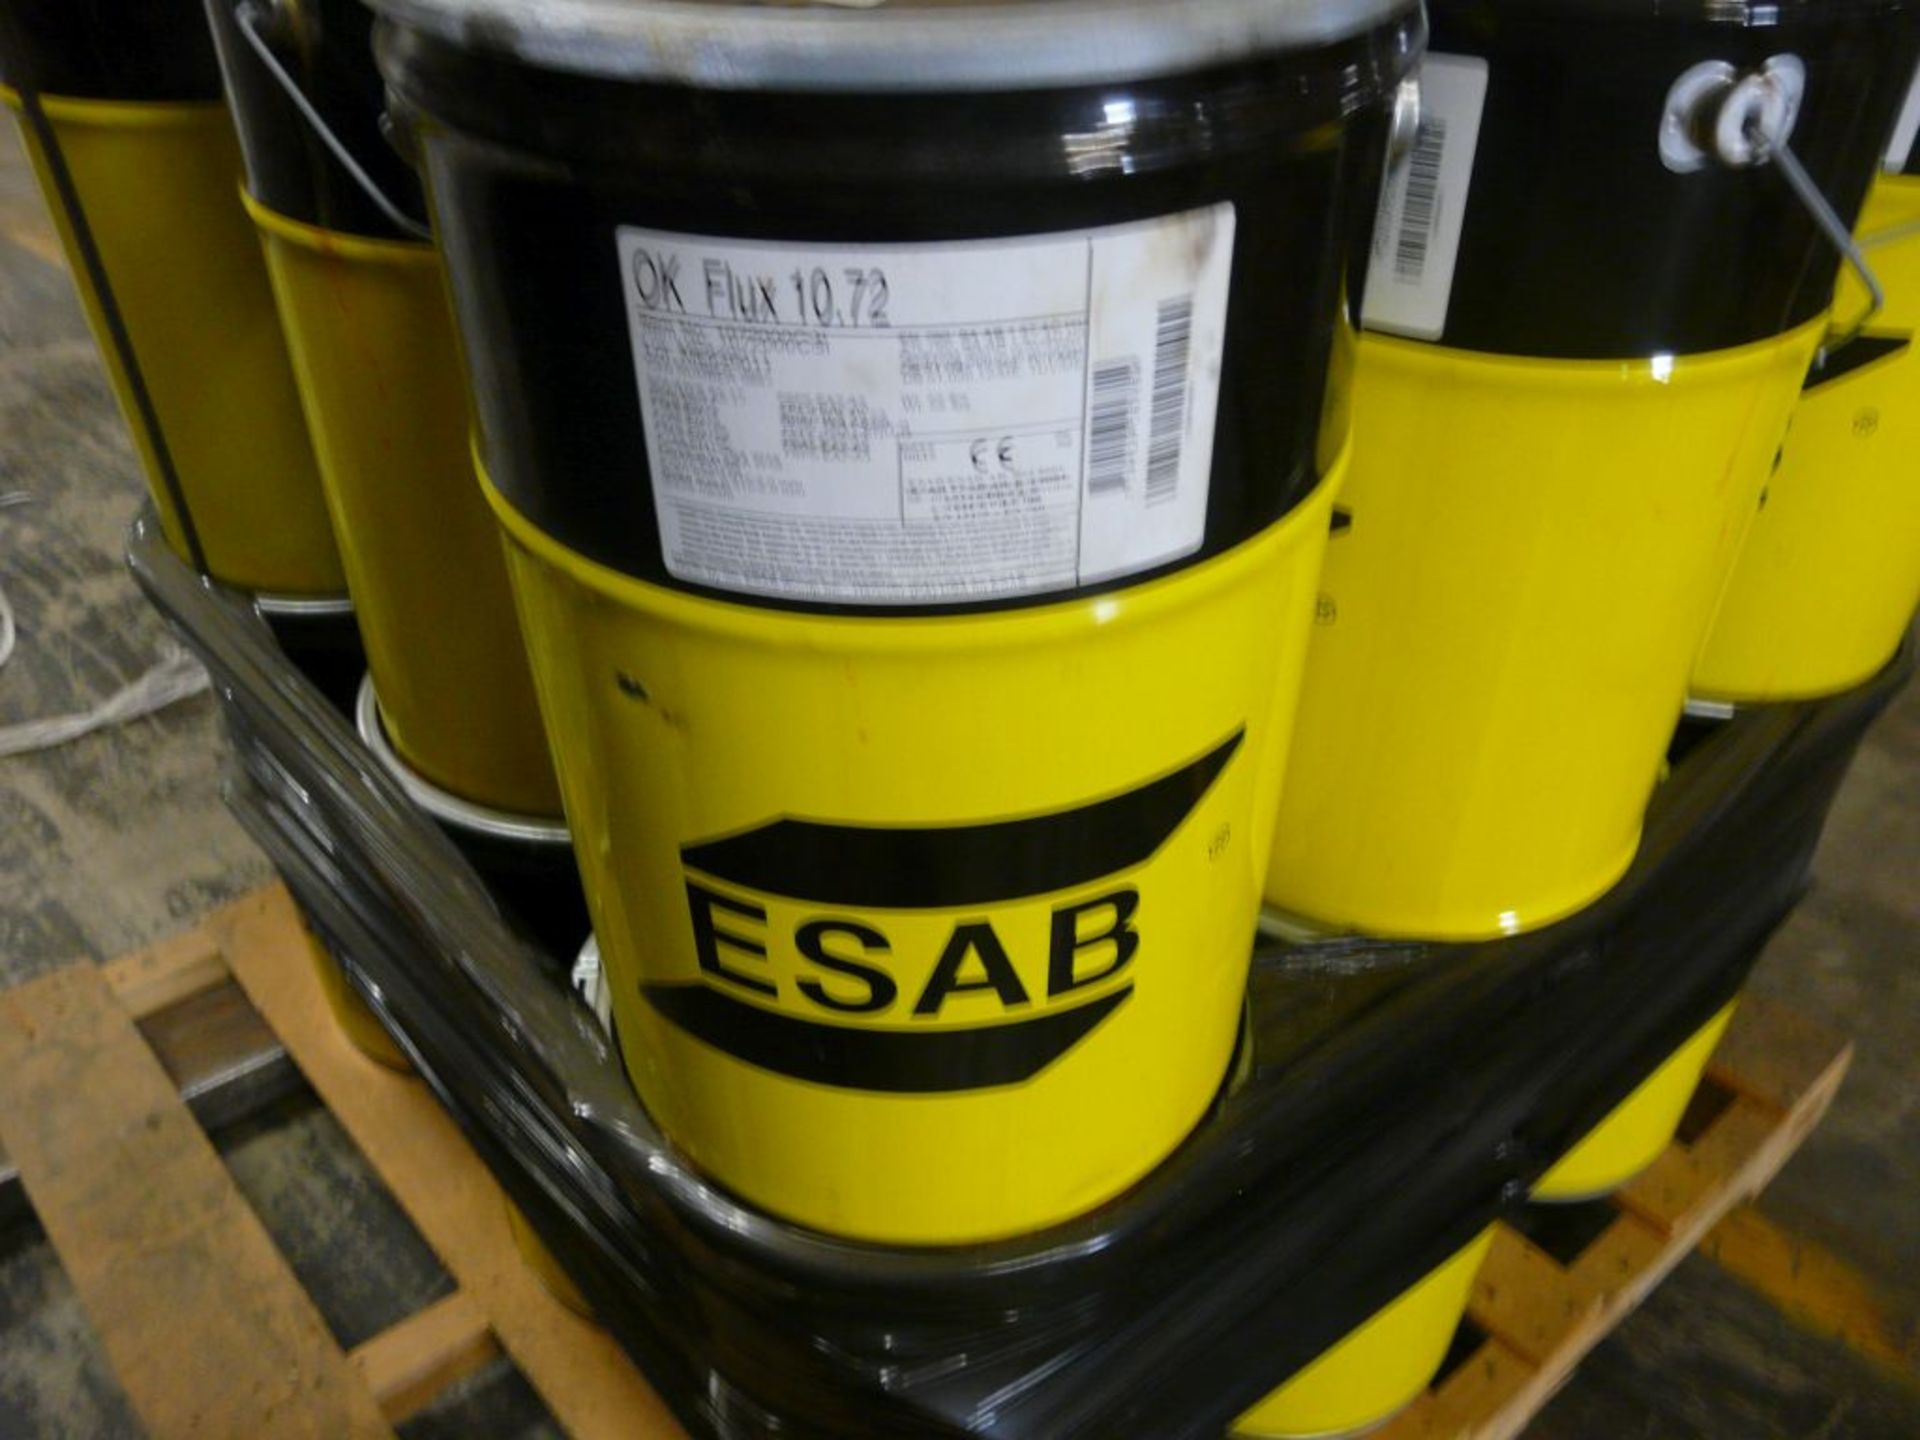 Lot of (63) Drums of ESAB Flux 10.72 - Part No. 1072000CBI; 55 lbs Each; Tag: 214961 - Image 4 of 4